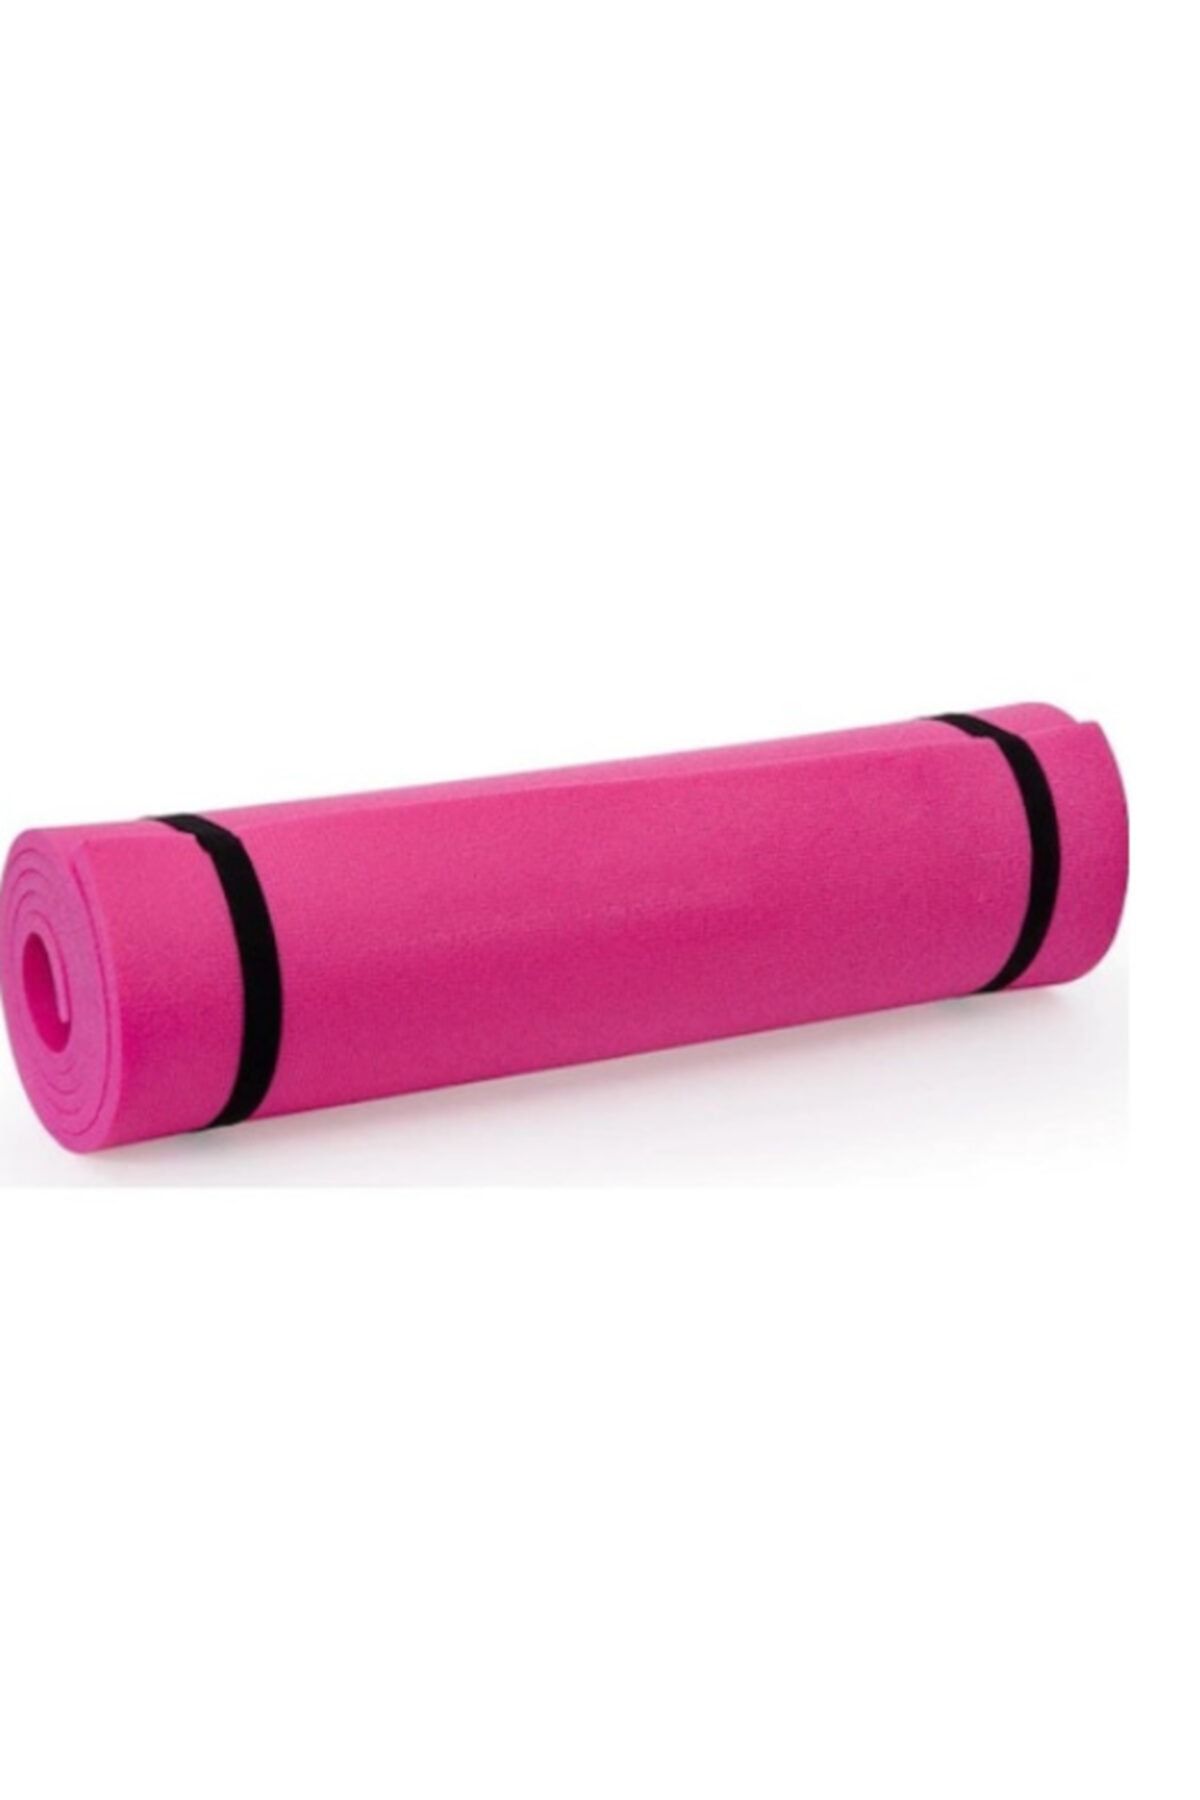 Phers Pink Pilates Mat and Jump Rope - 6.5 Mm Thickness Pilates Mat and Yoga  Mat - Trendyol